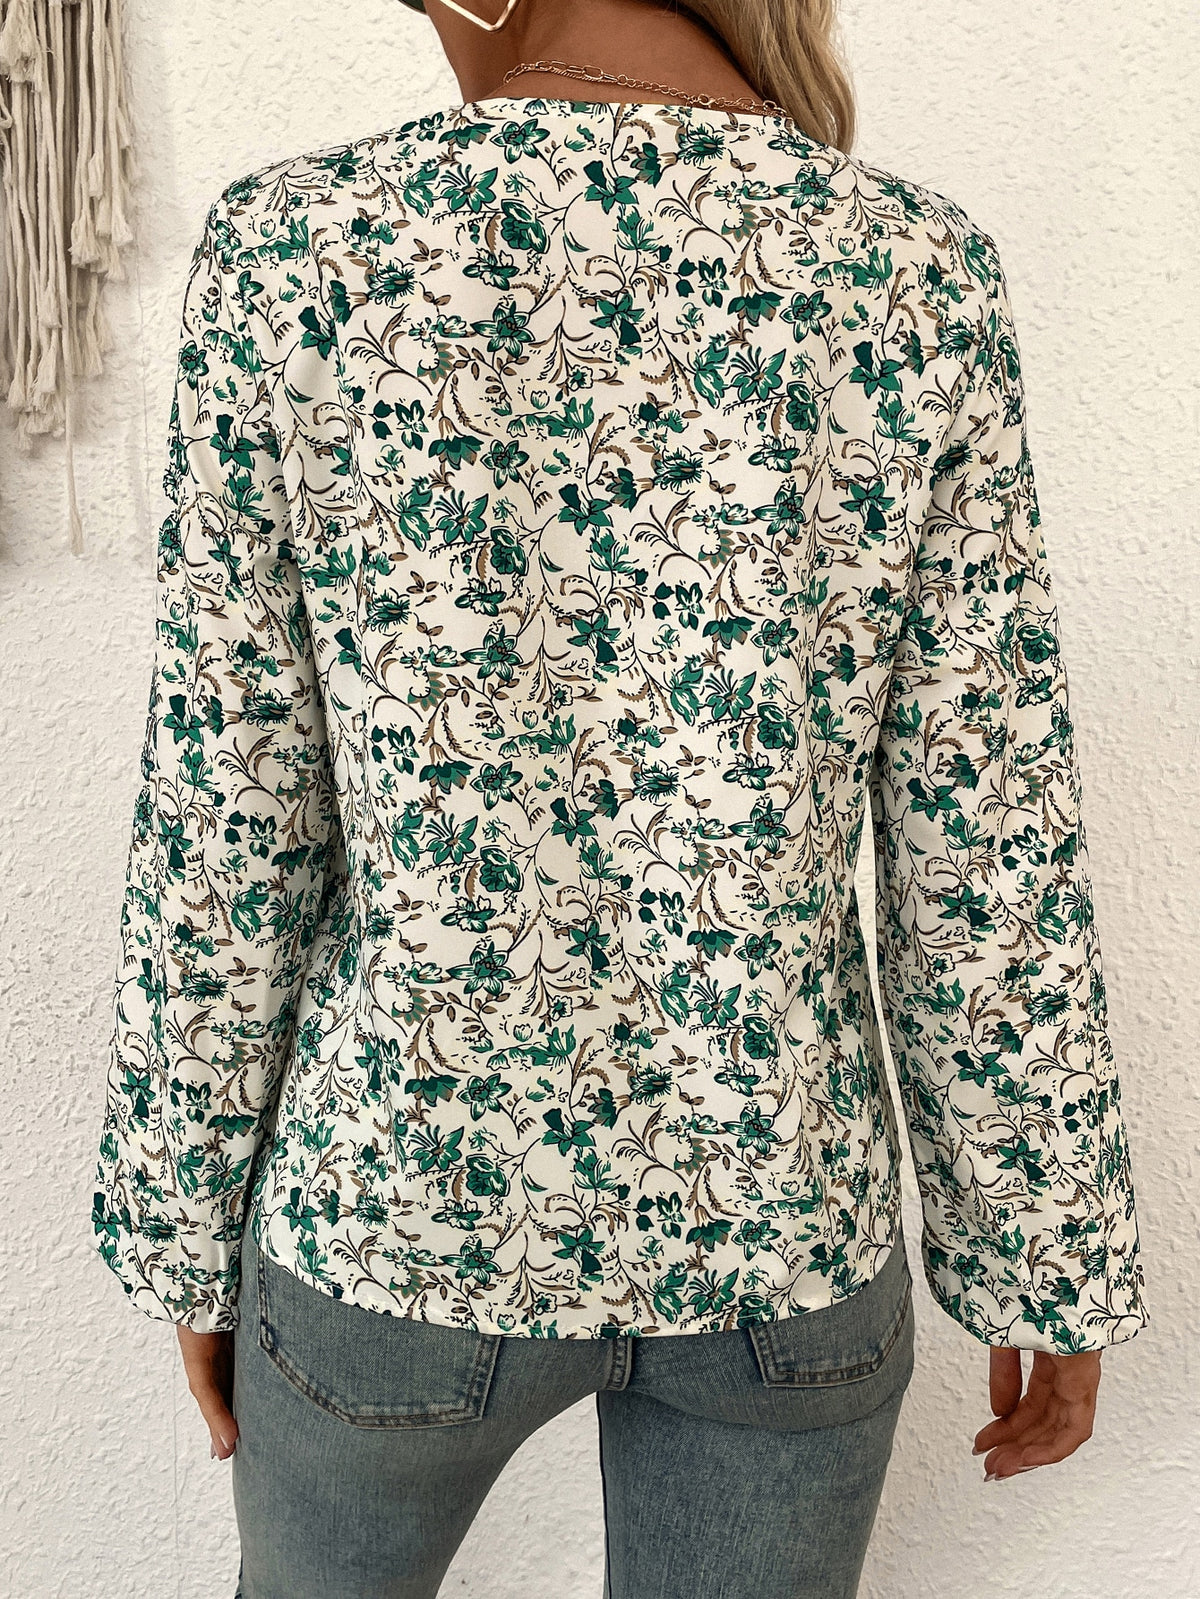 Floral Print Lantern Sleeve Blouse with Lace Insert